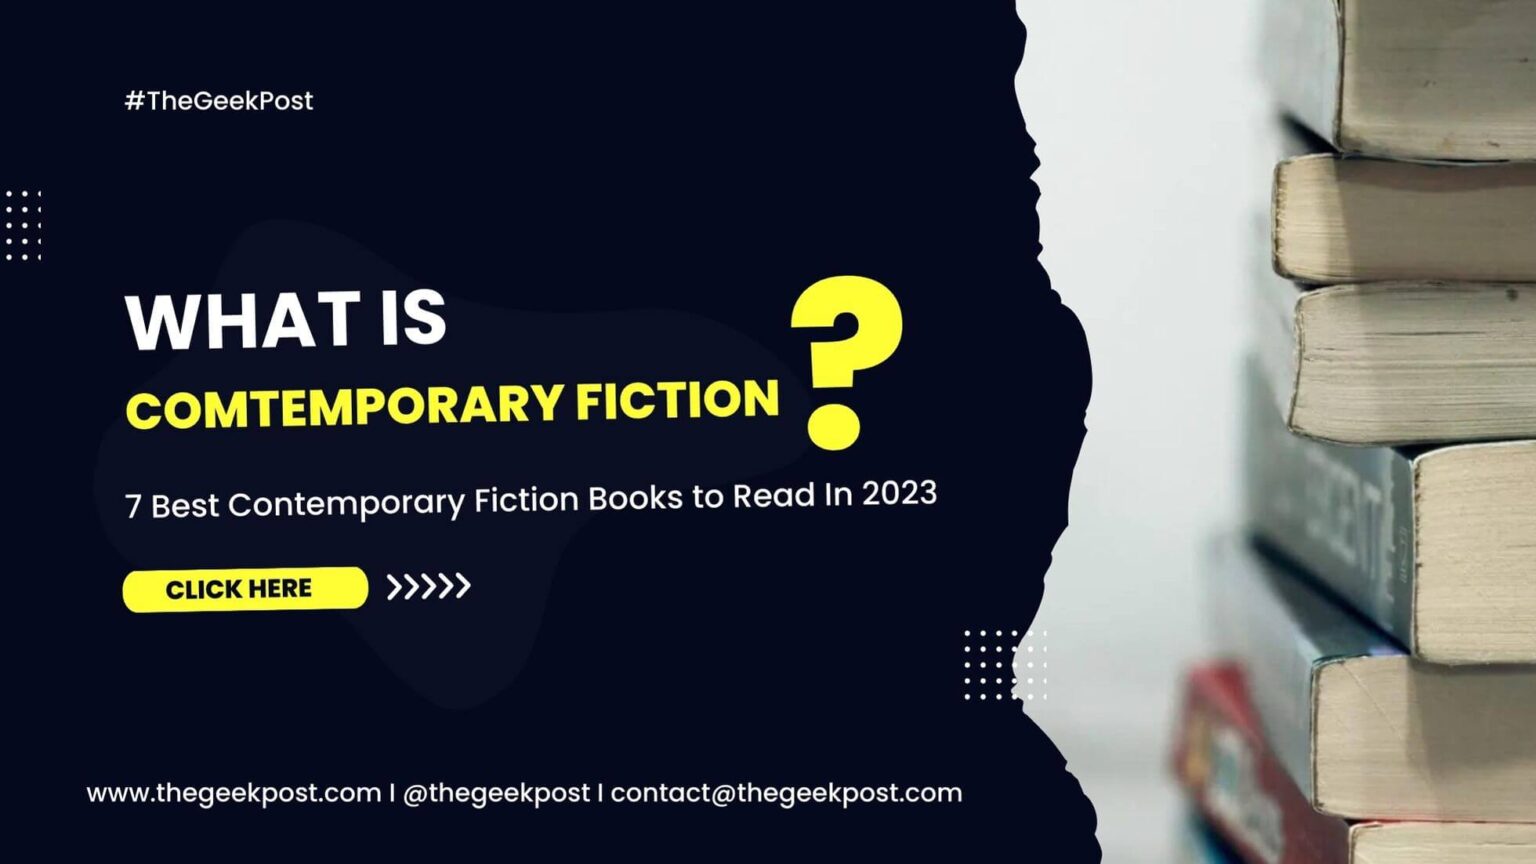 7 Best Contemporary Fiction Books to Read In 2023